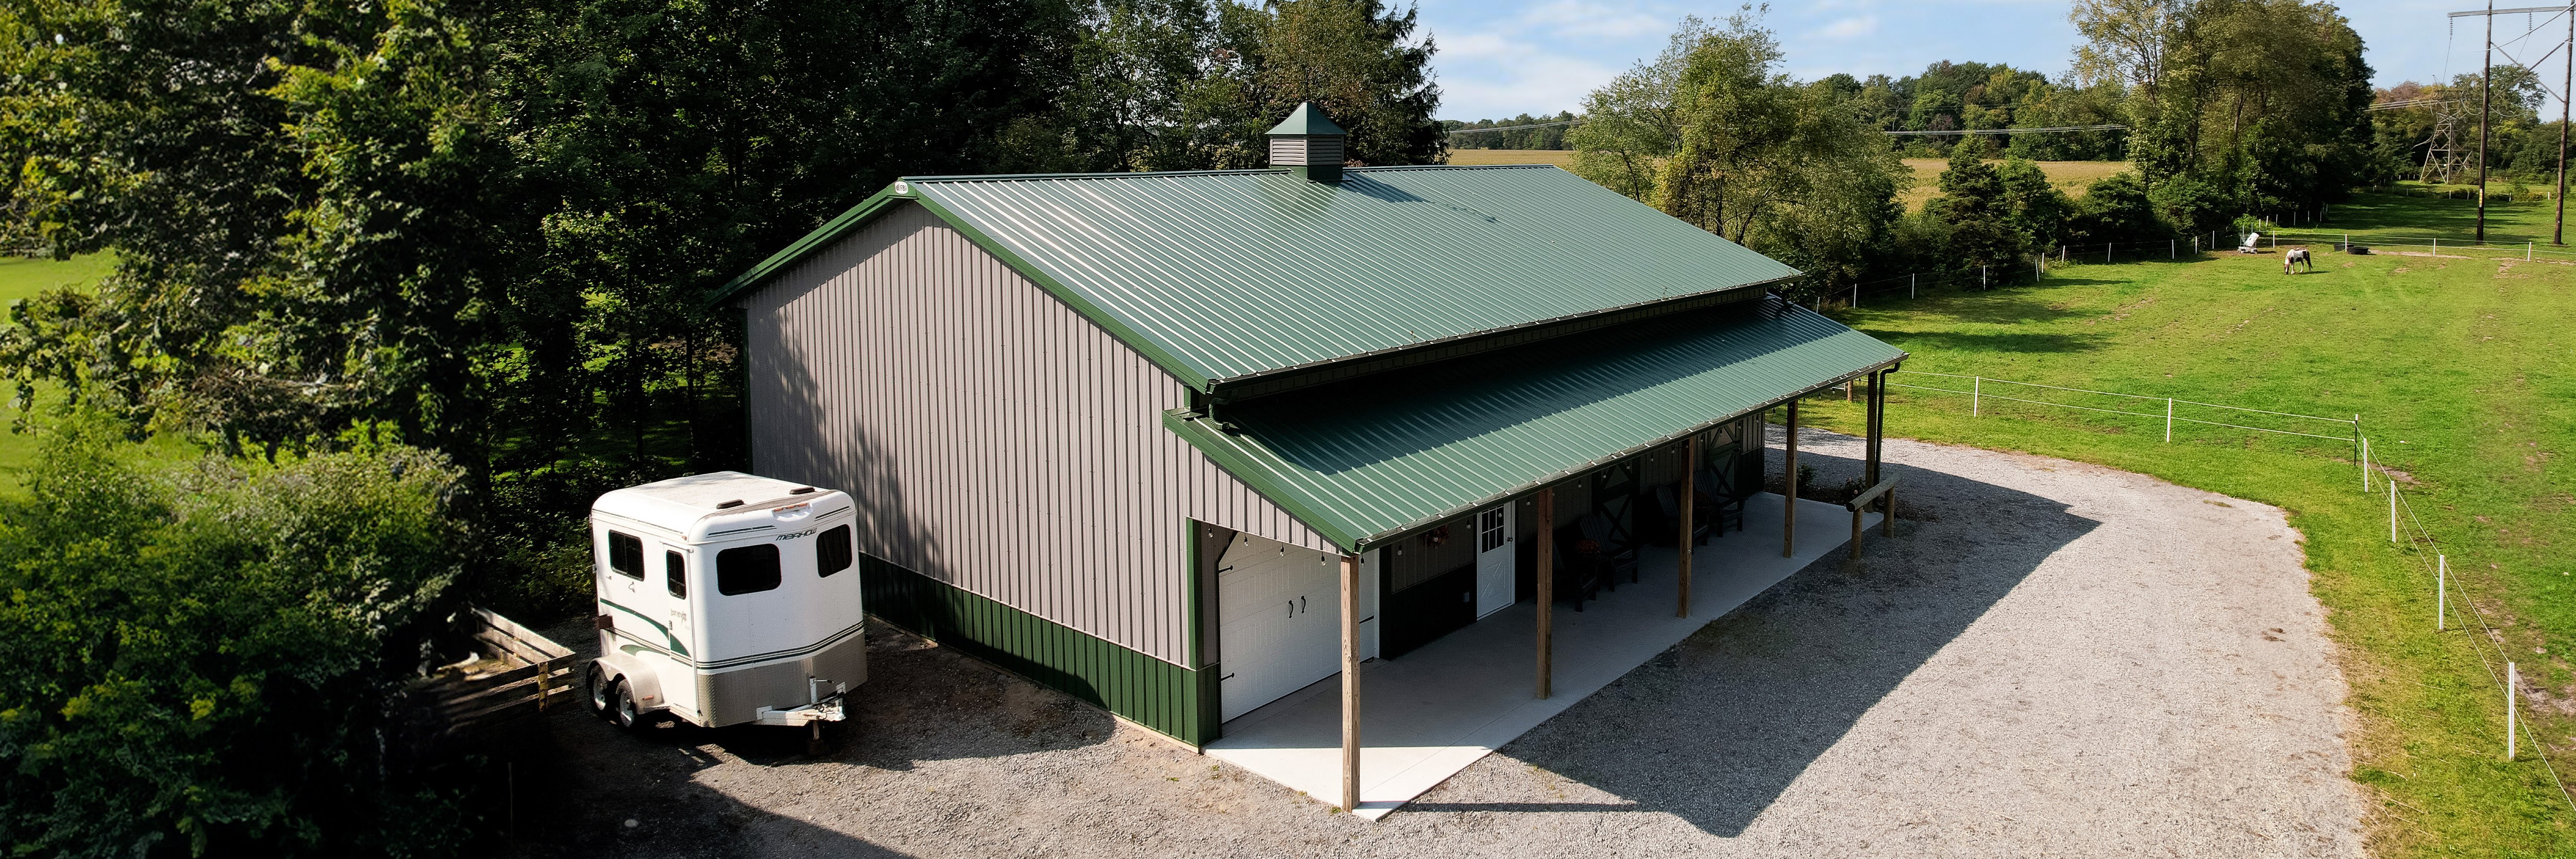 Can You Add a Lean-To to an Existing Pole Barn?